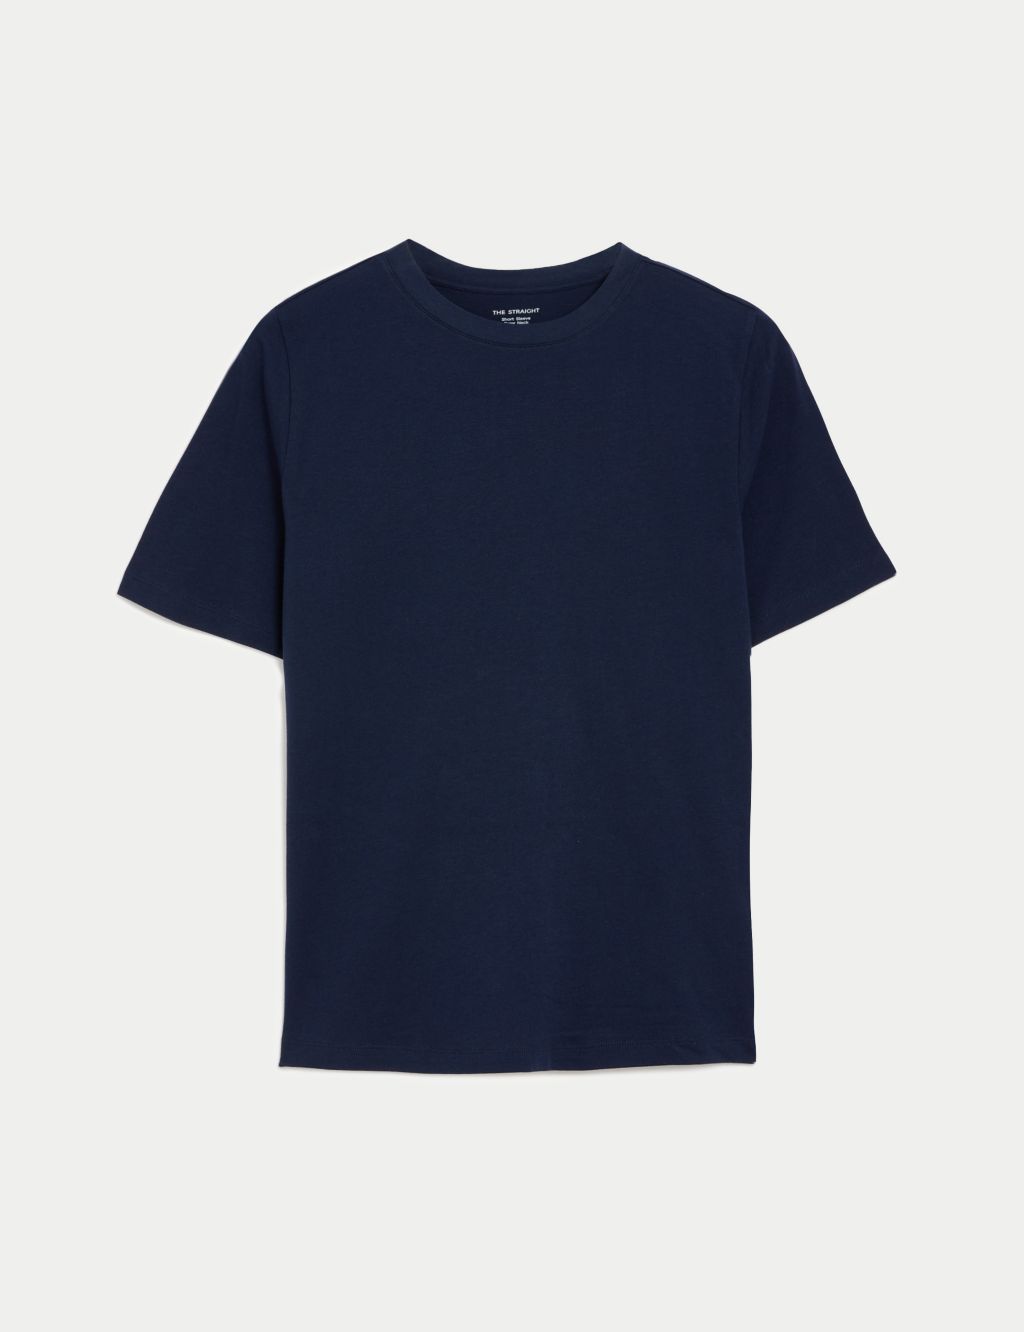 Pure Cotton Everyday Fit T-Shirt image 2